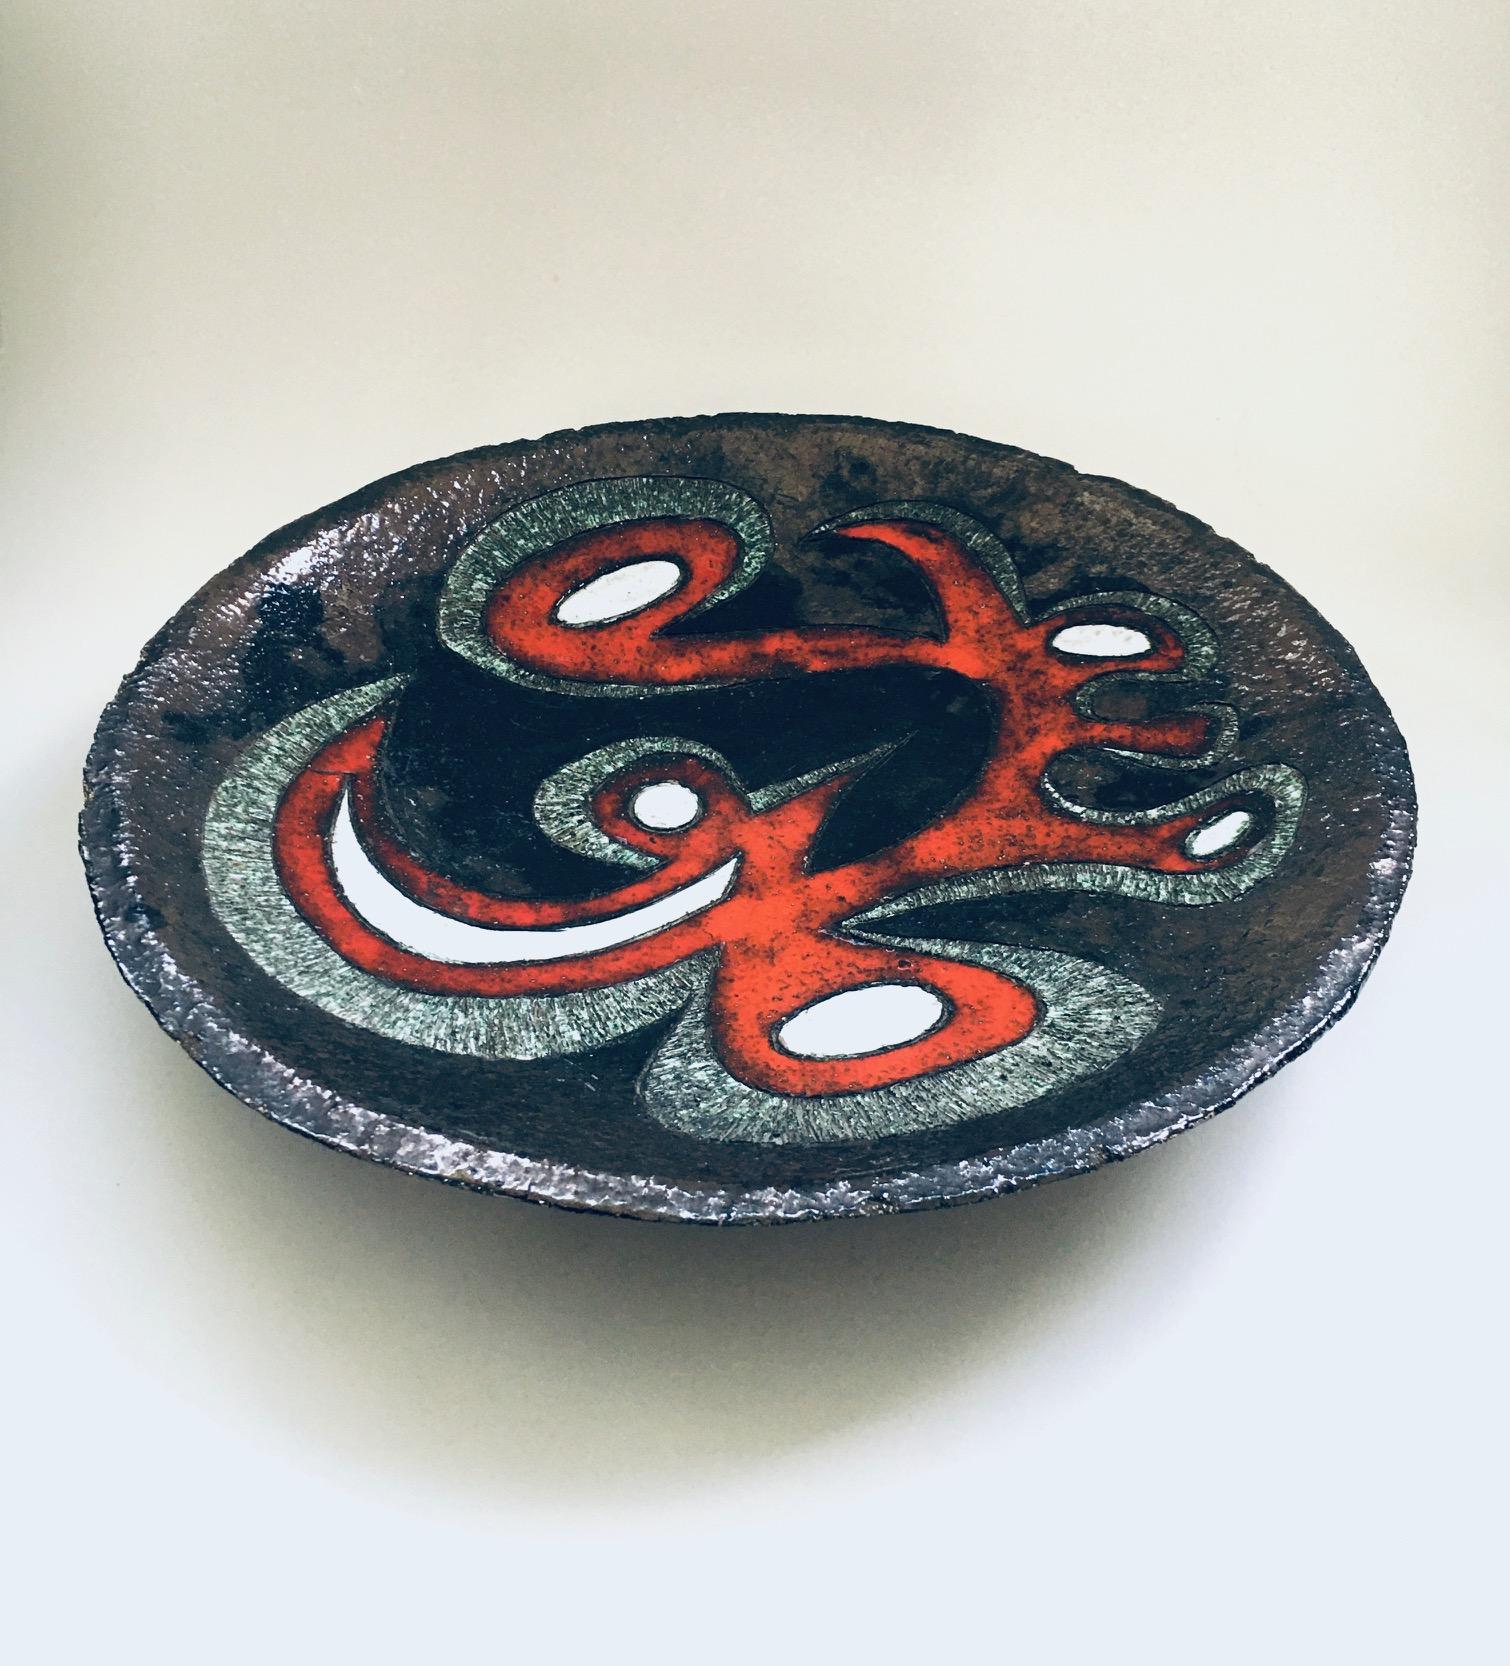 Vintage Brutalist Design Art Ceramics XL Bowl, signed Delabell. Made in Belgium, 1960's. Attributed to the Perignem / Amphora Art Pottery Studios. Black under glaze with red, greenish and white over glazes. Abstract figurative illustration in